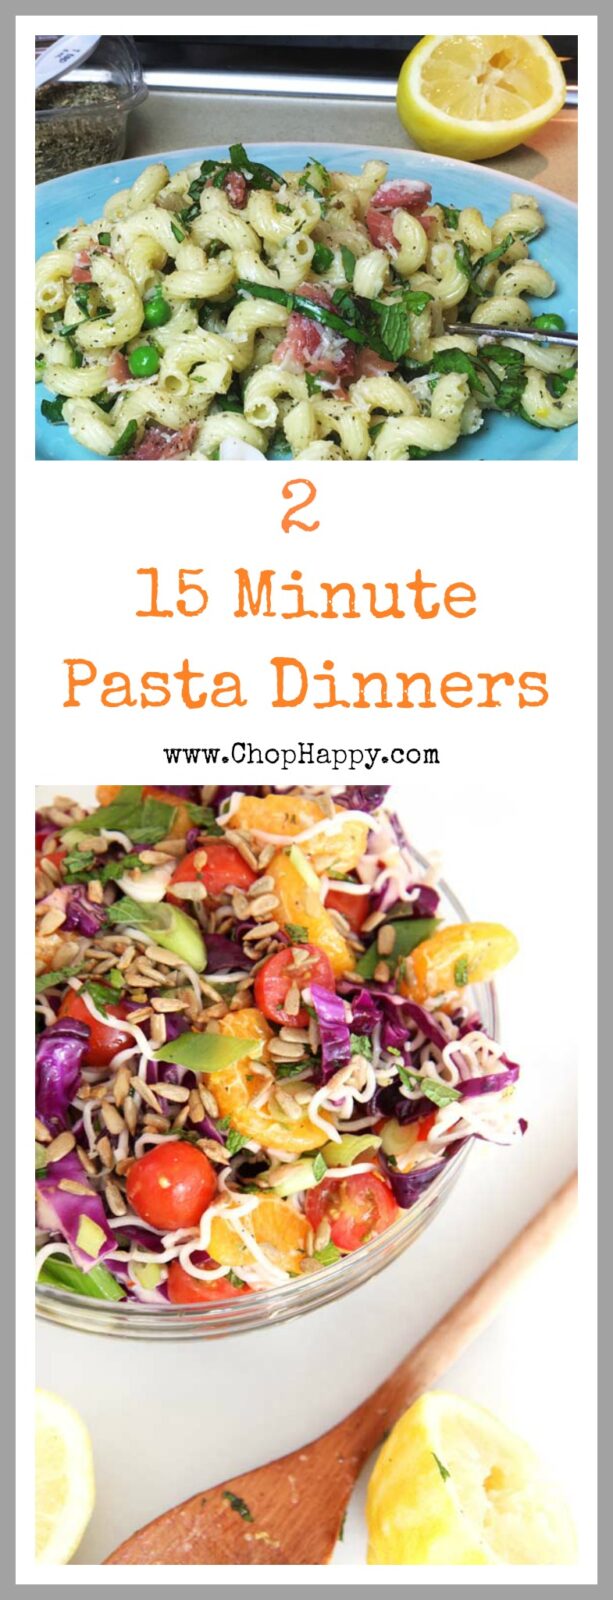 2 Pasta Dinners Recipes Ready in 15 Minutes- these are simple and full of amazing flavor that your family will crave. Just add pasta, lemon, and fun veggies and you have a quick recipe. l www.ChopHappy.com